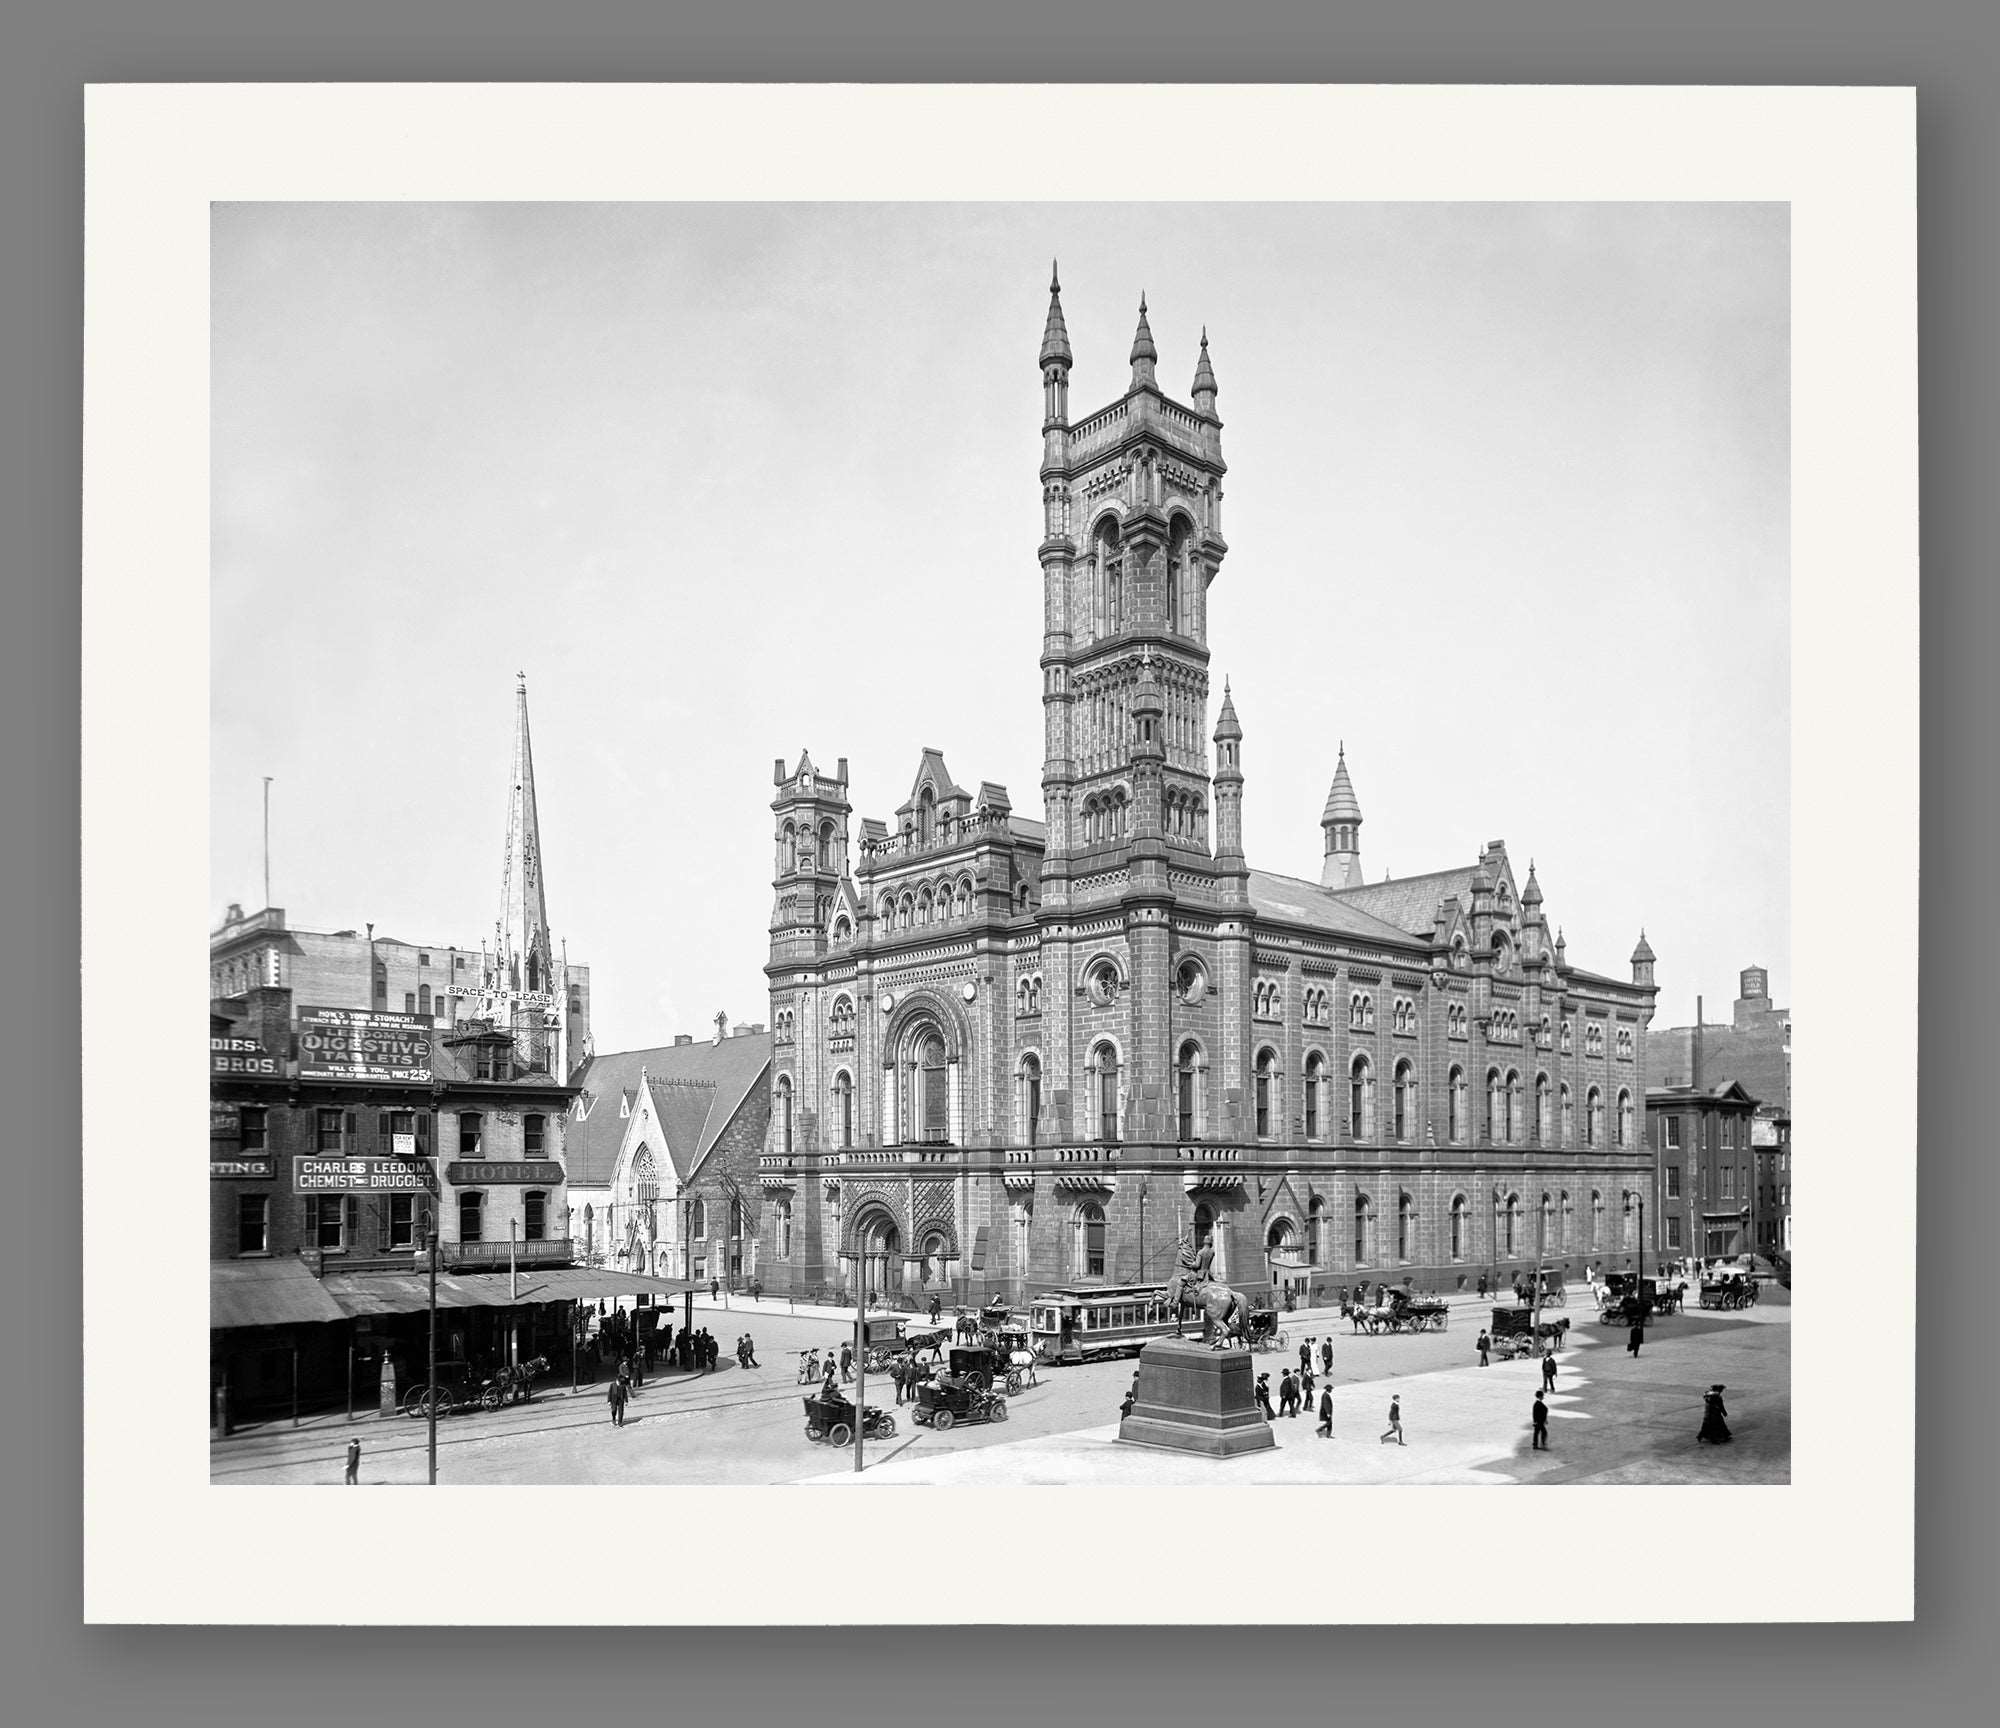 A paper reproduction print of a vintage photograph of Philadelphia